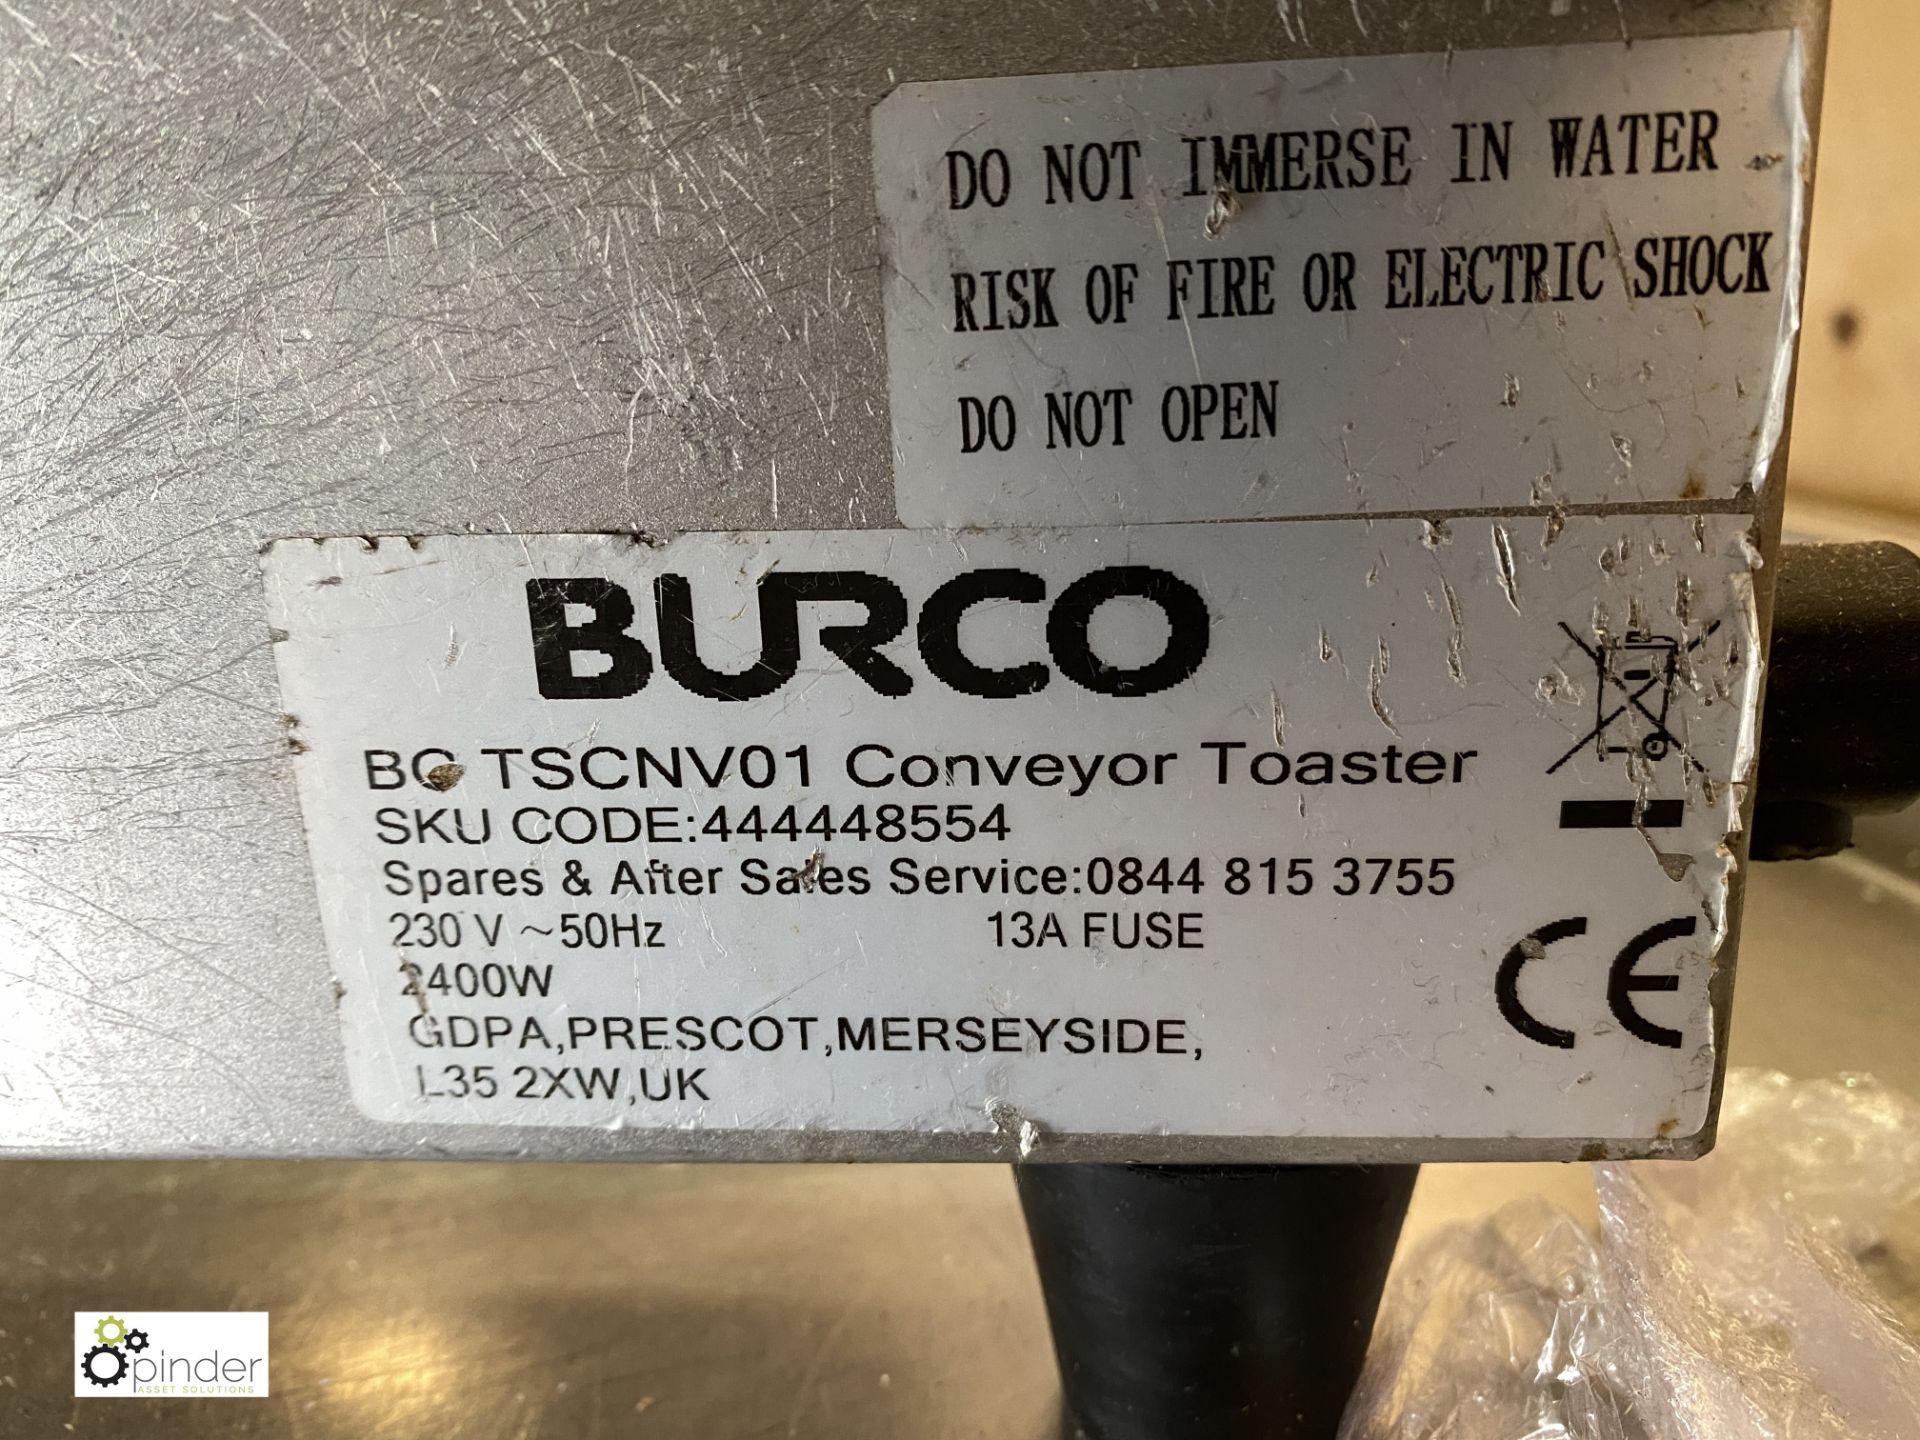 Burco BC TSCBV01 stainless steel Conveyor Toaster, 240volts (LOCATION: Stanningley, Leeds) - Image 3 of 3